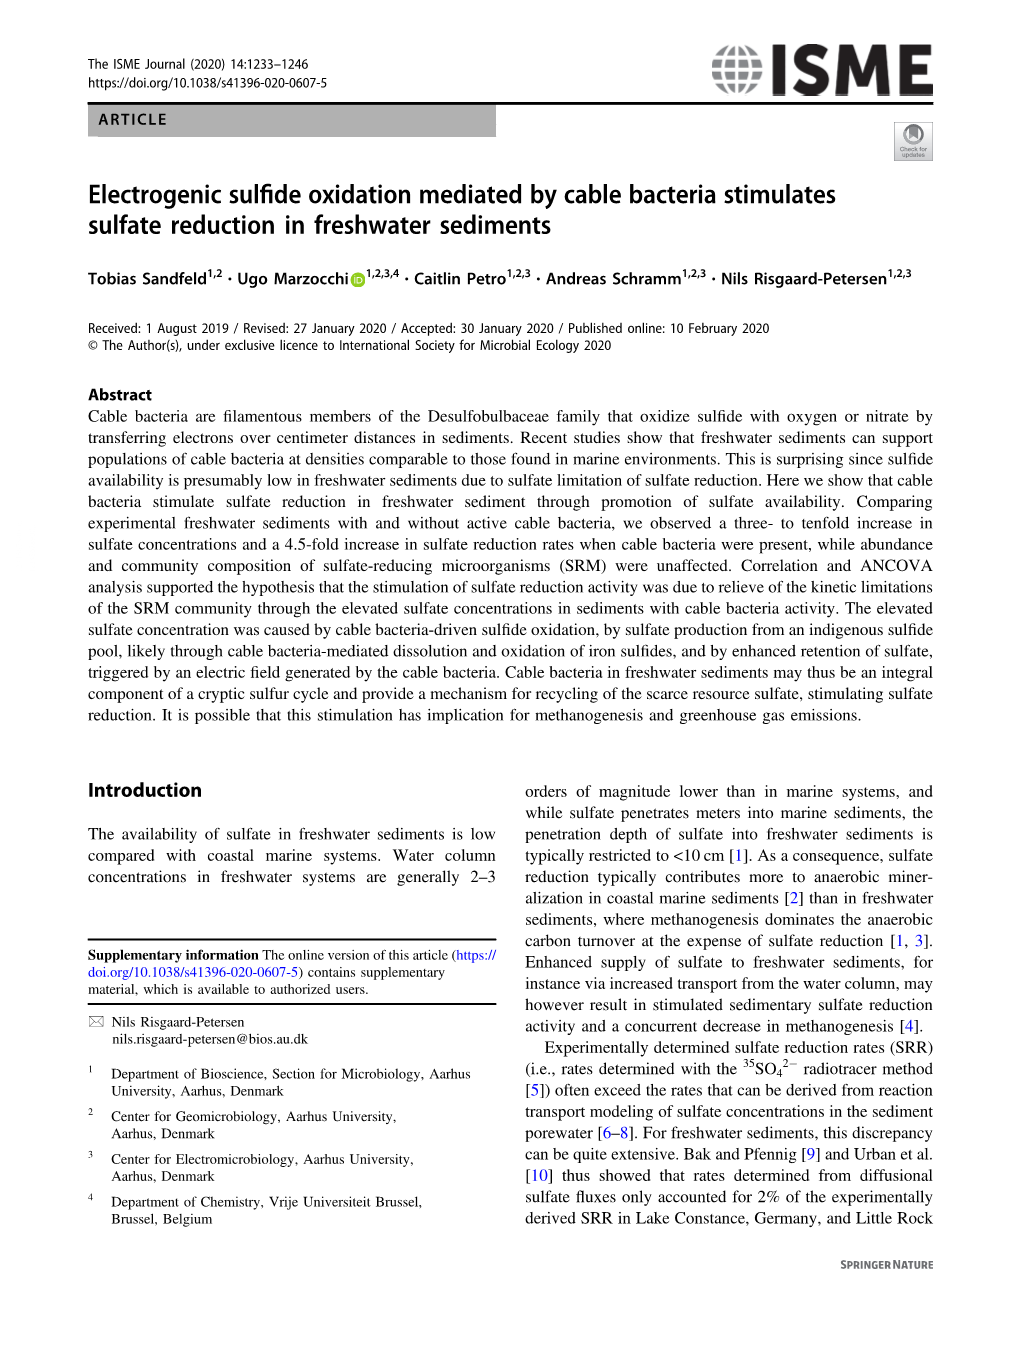 Electrogenic Sulfide Oxidation Mediated by Cable Bacteria